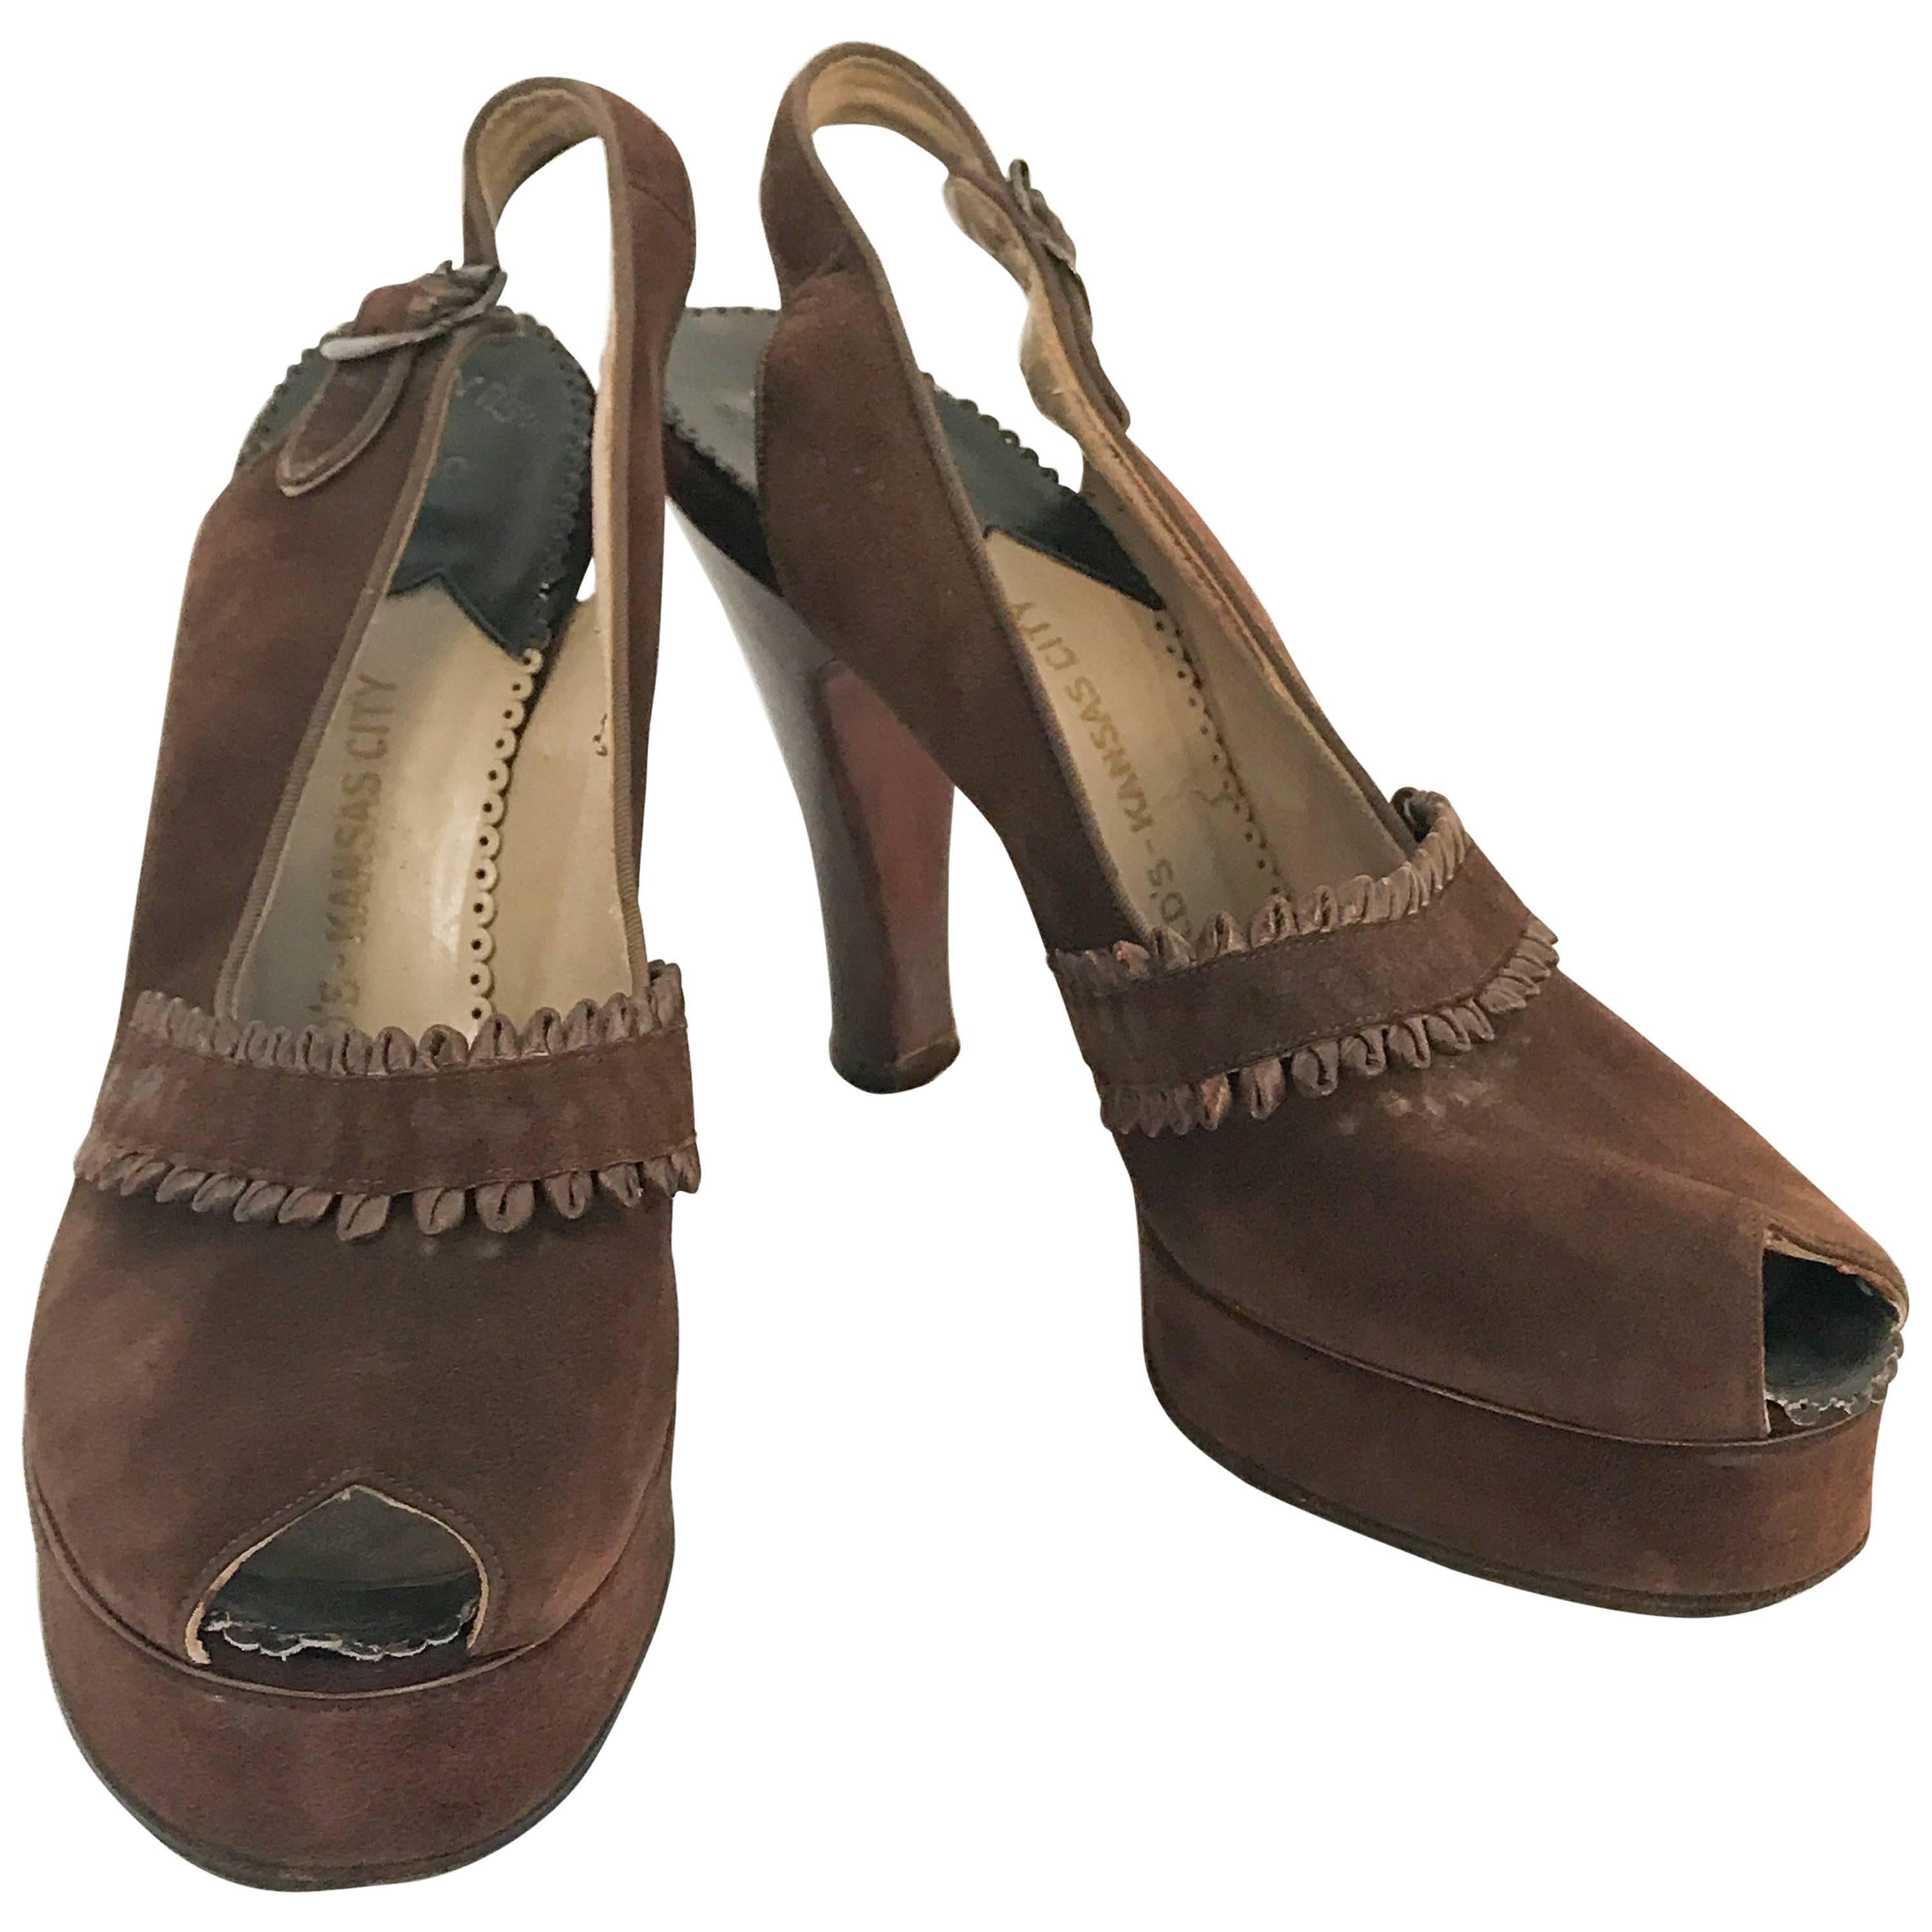 1947 Brown Suede and Leather Sling Back Heels